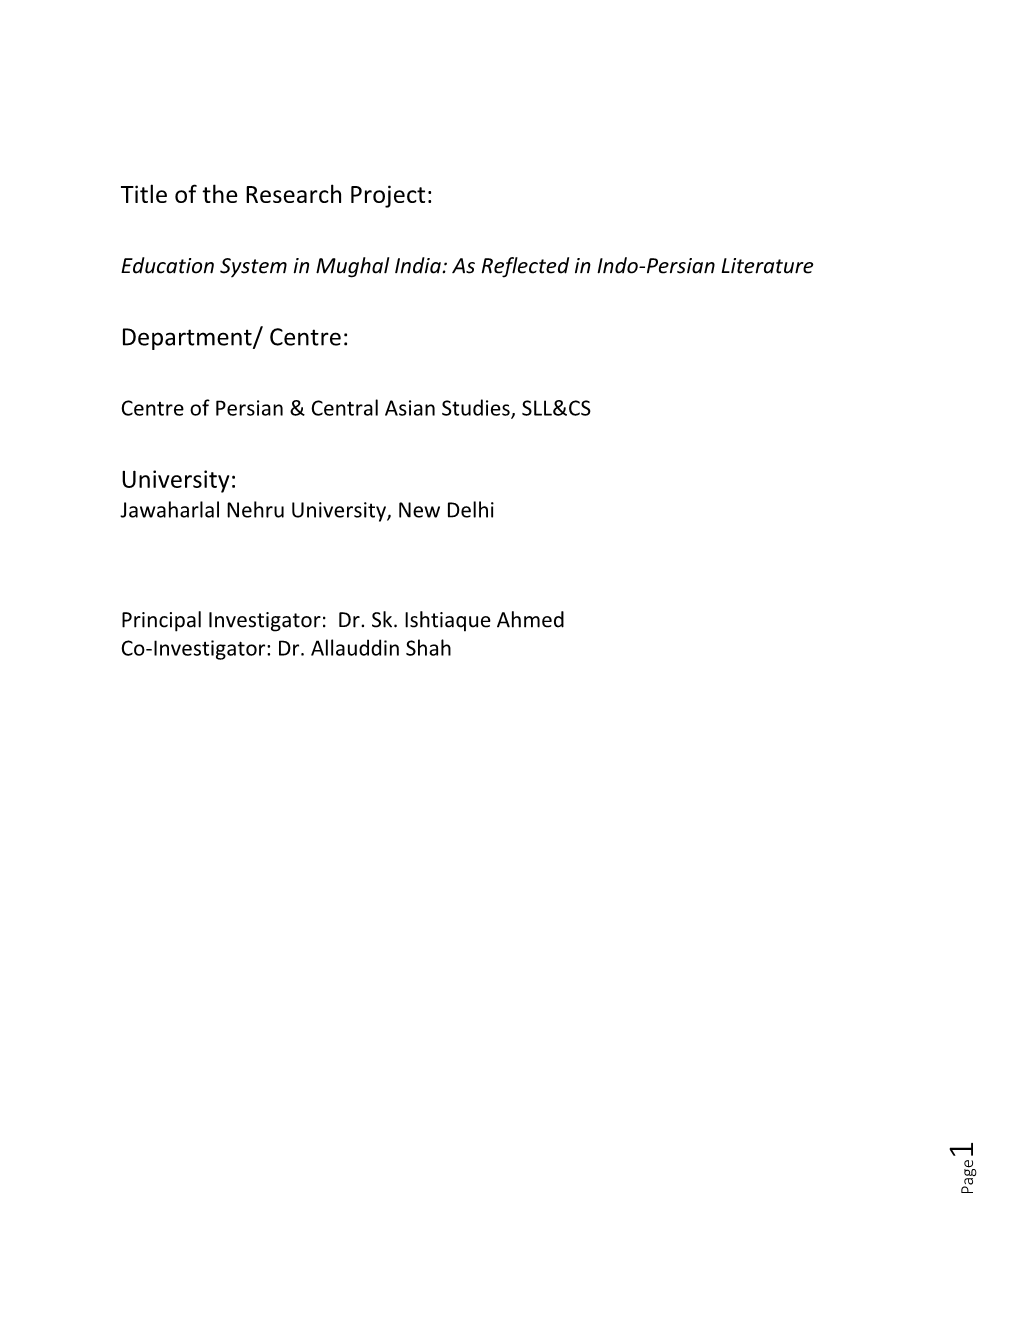 Report of Research Project "Education System in Mughal India